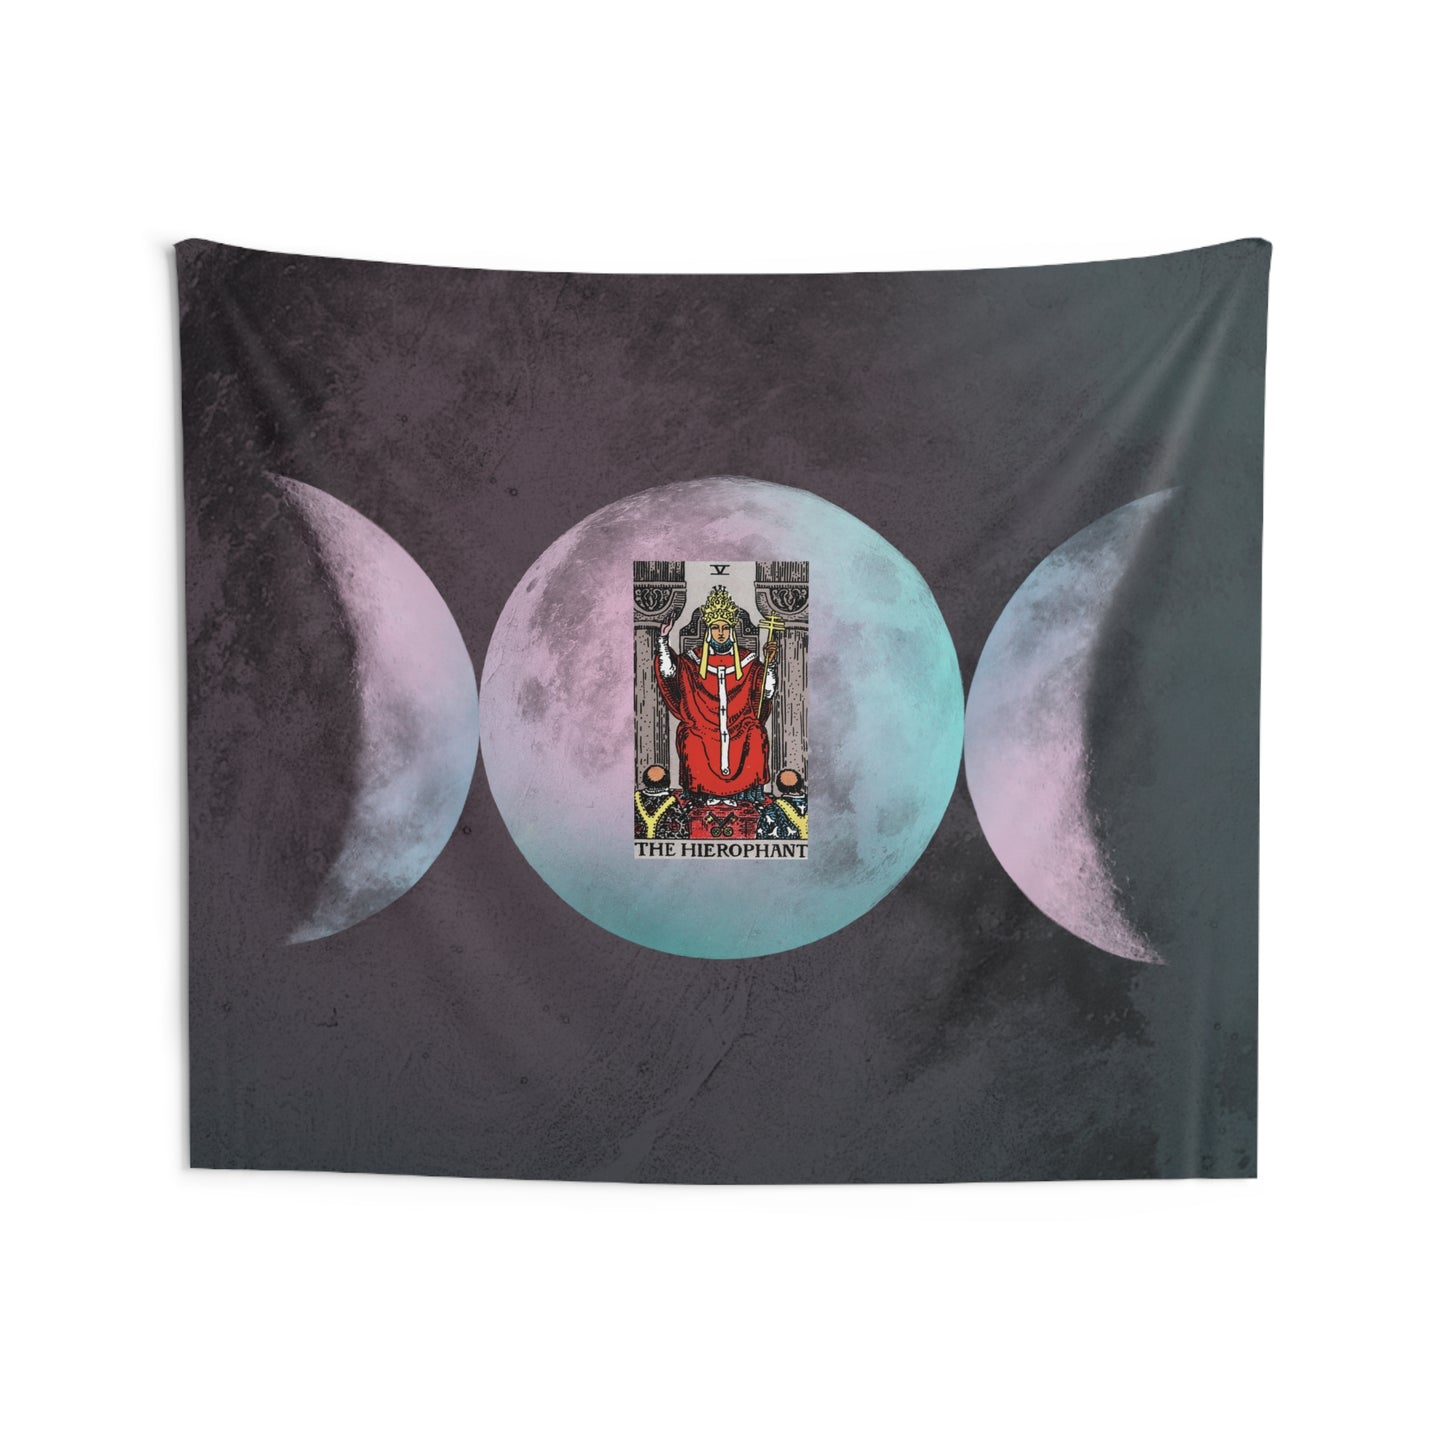 The Hierophant Tarot Card Altar Cloth or Tapestry with Triple Goddess Symbol